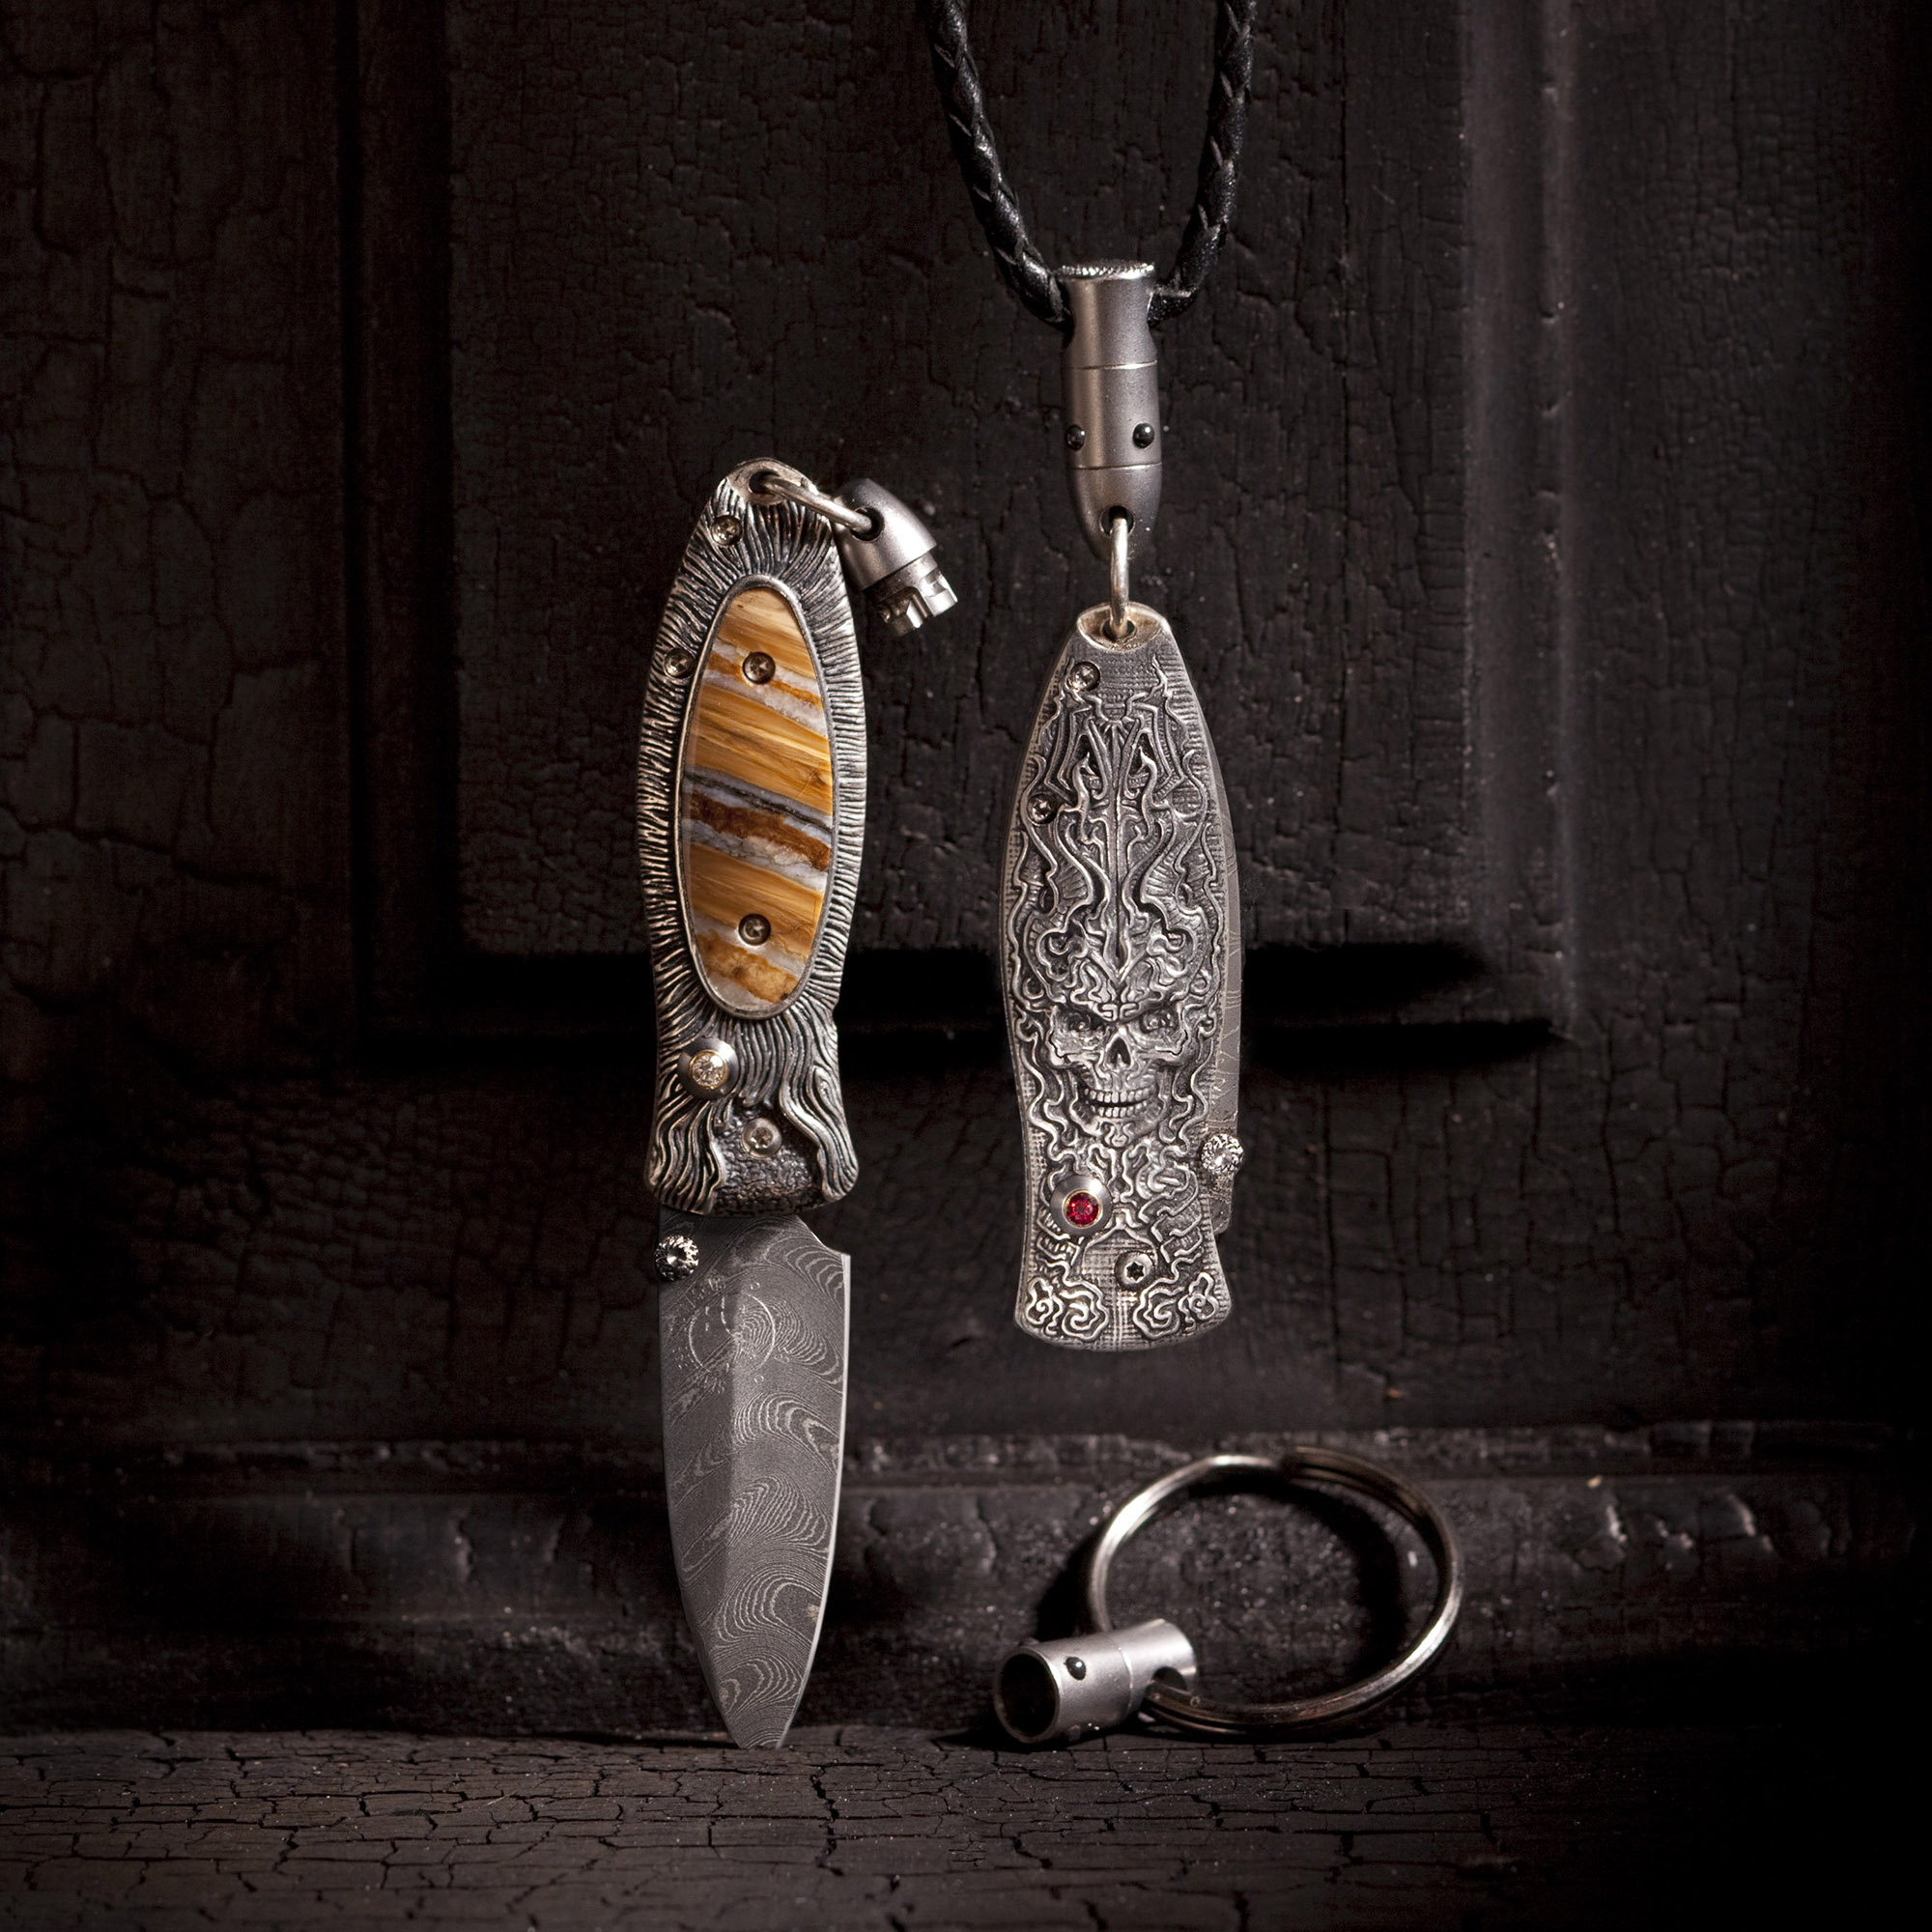 New Pendant Knife Is Bold Jewelry Choice for Men